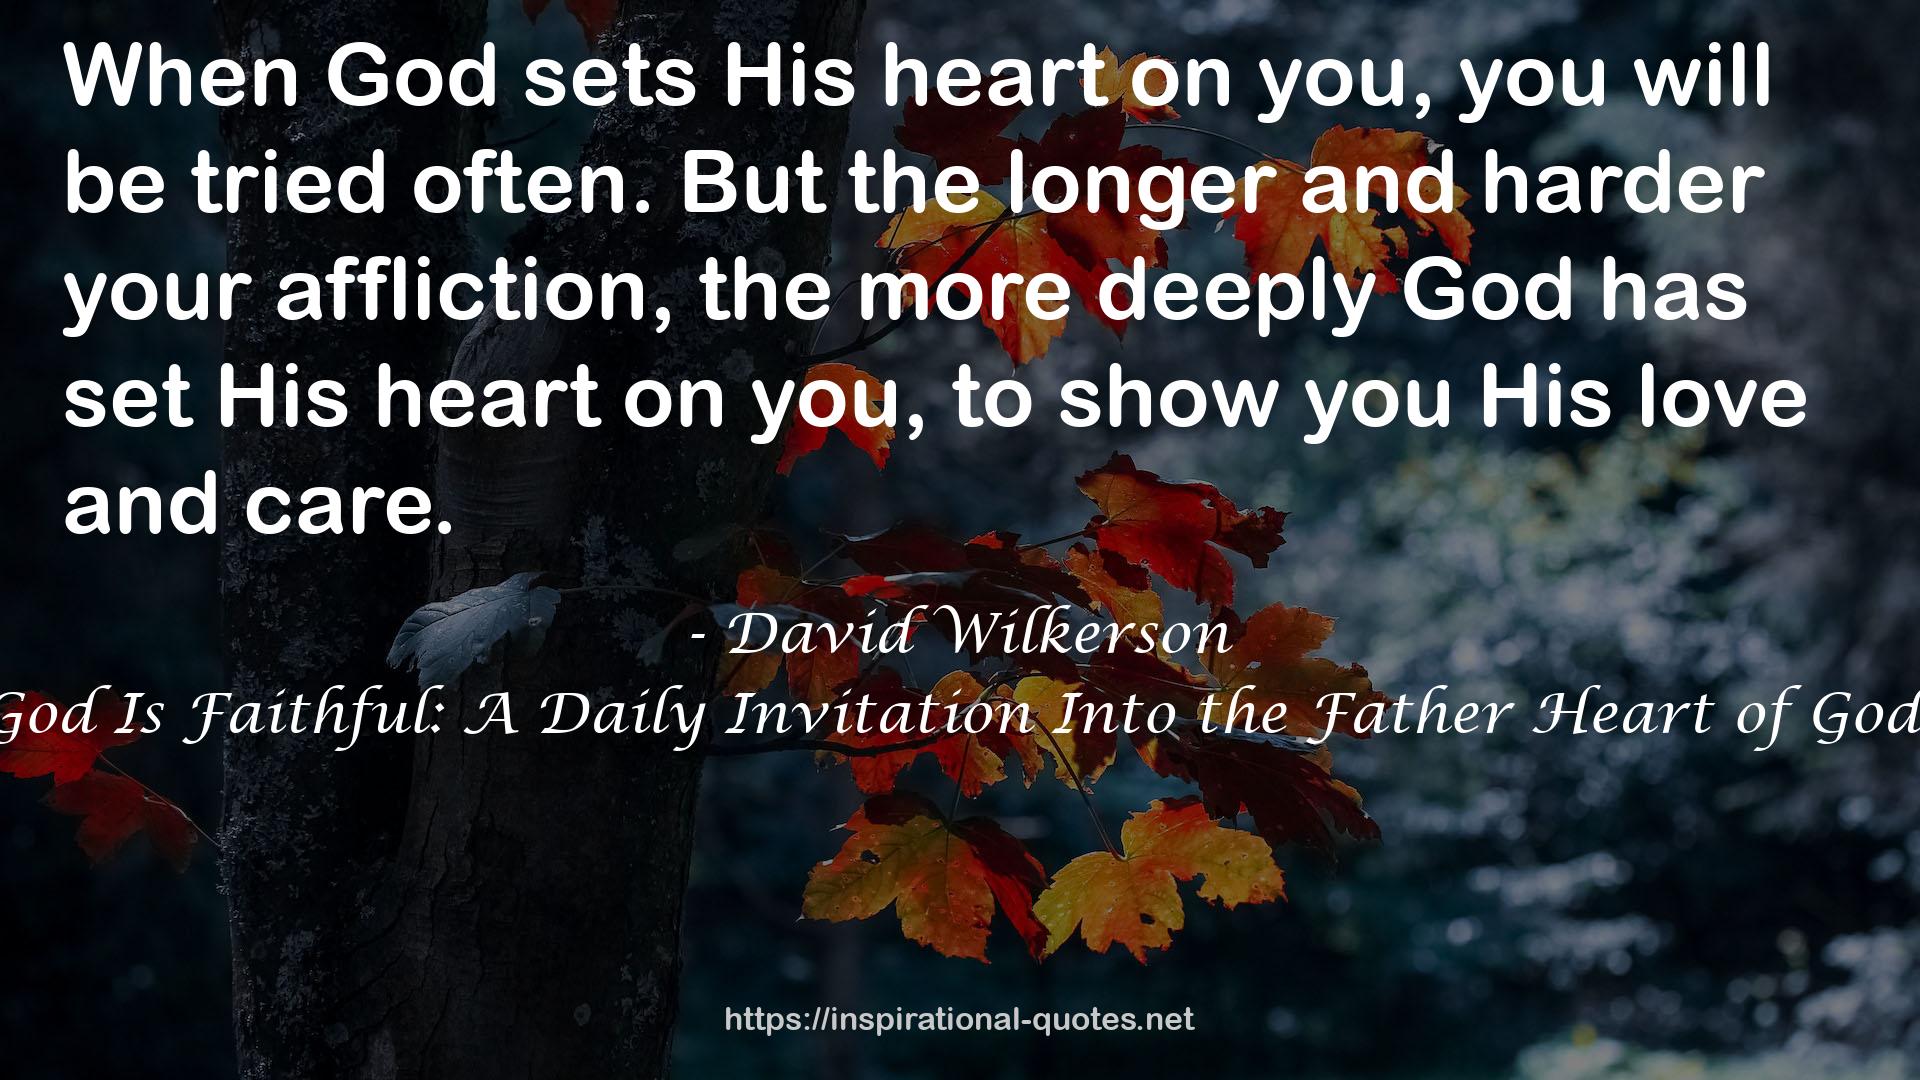 God Is Faithful: A Daily Invitation Into the Father Heart of God QUOTES